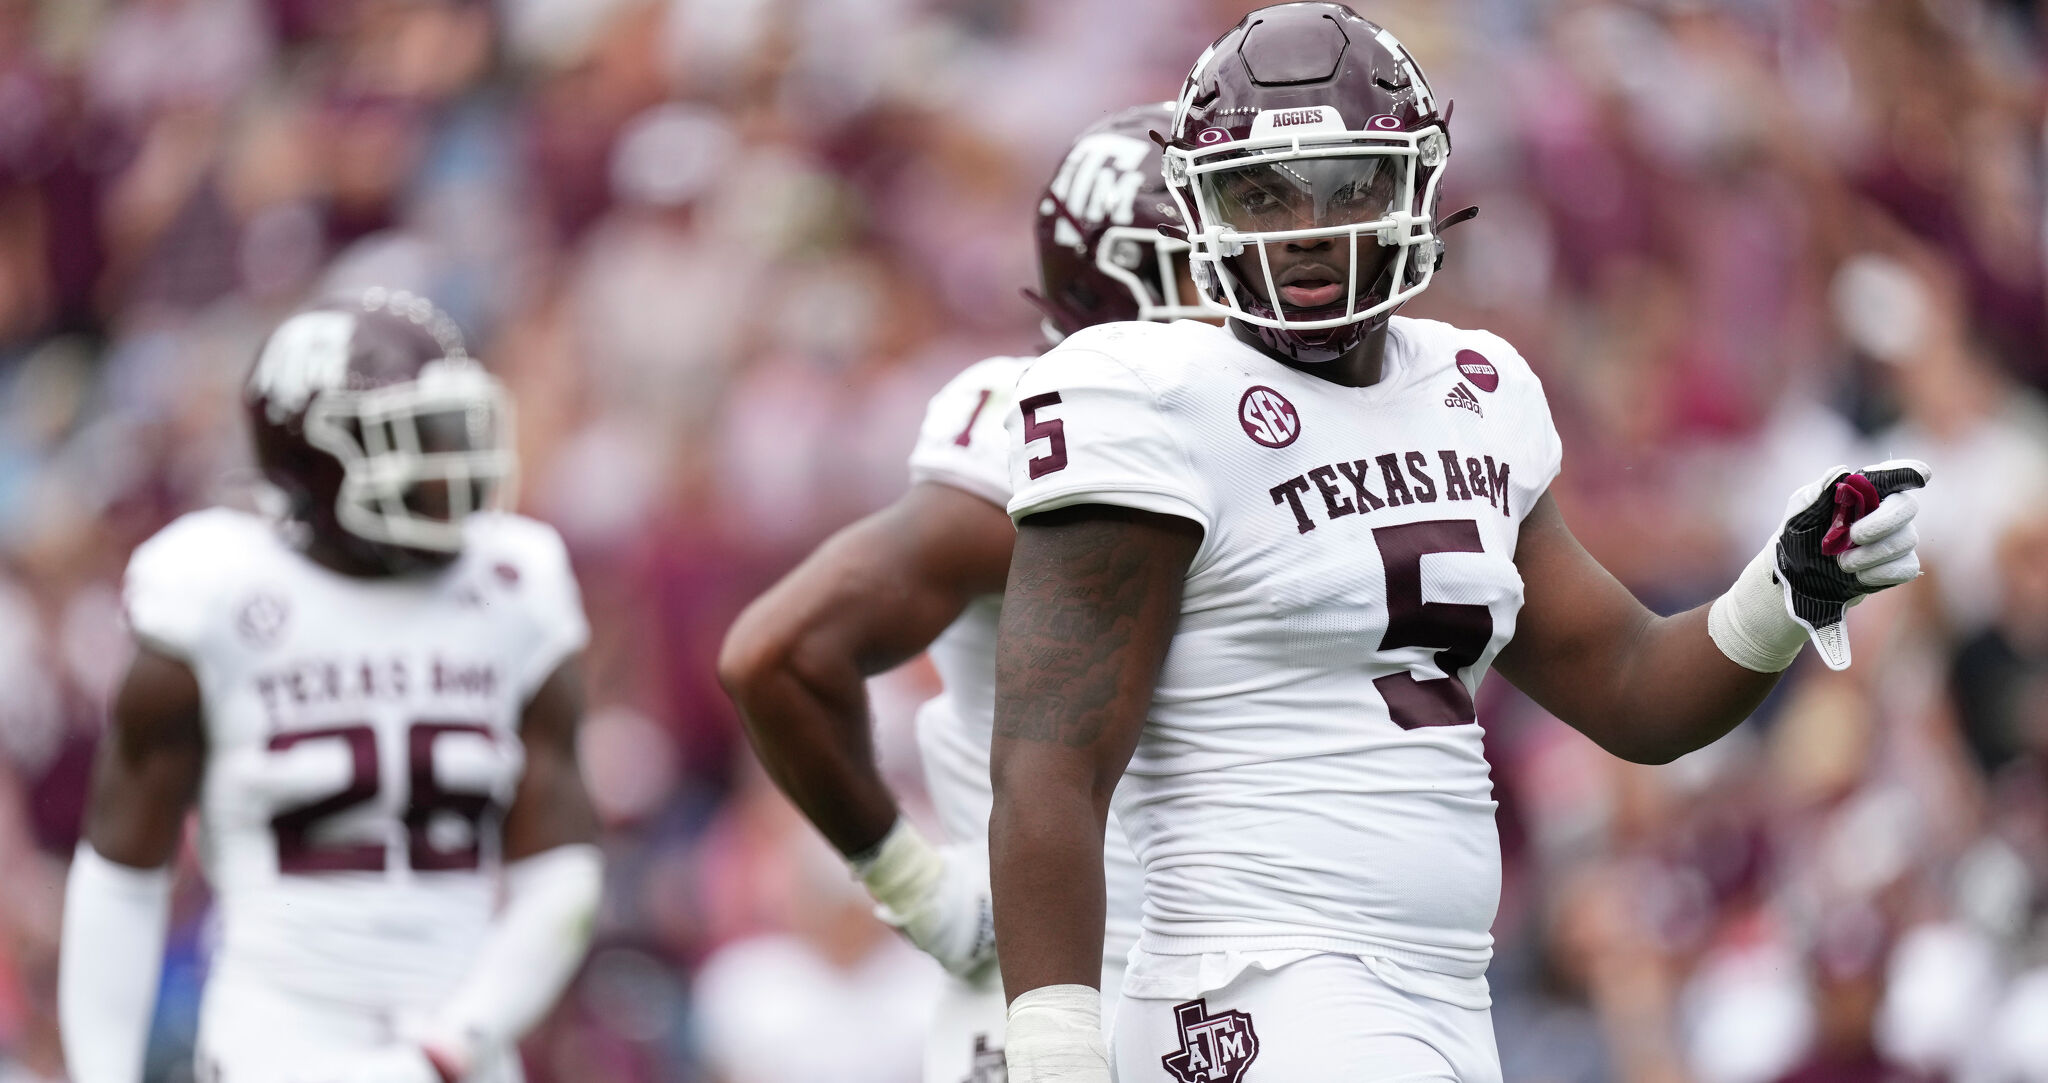 Five Texas A&M Aggies will play in NFL Pro Bowl on Sunday - Good